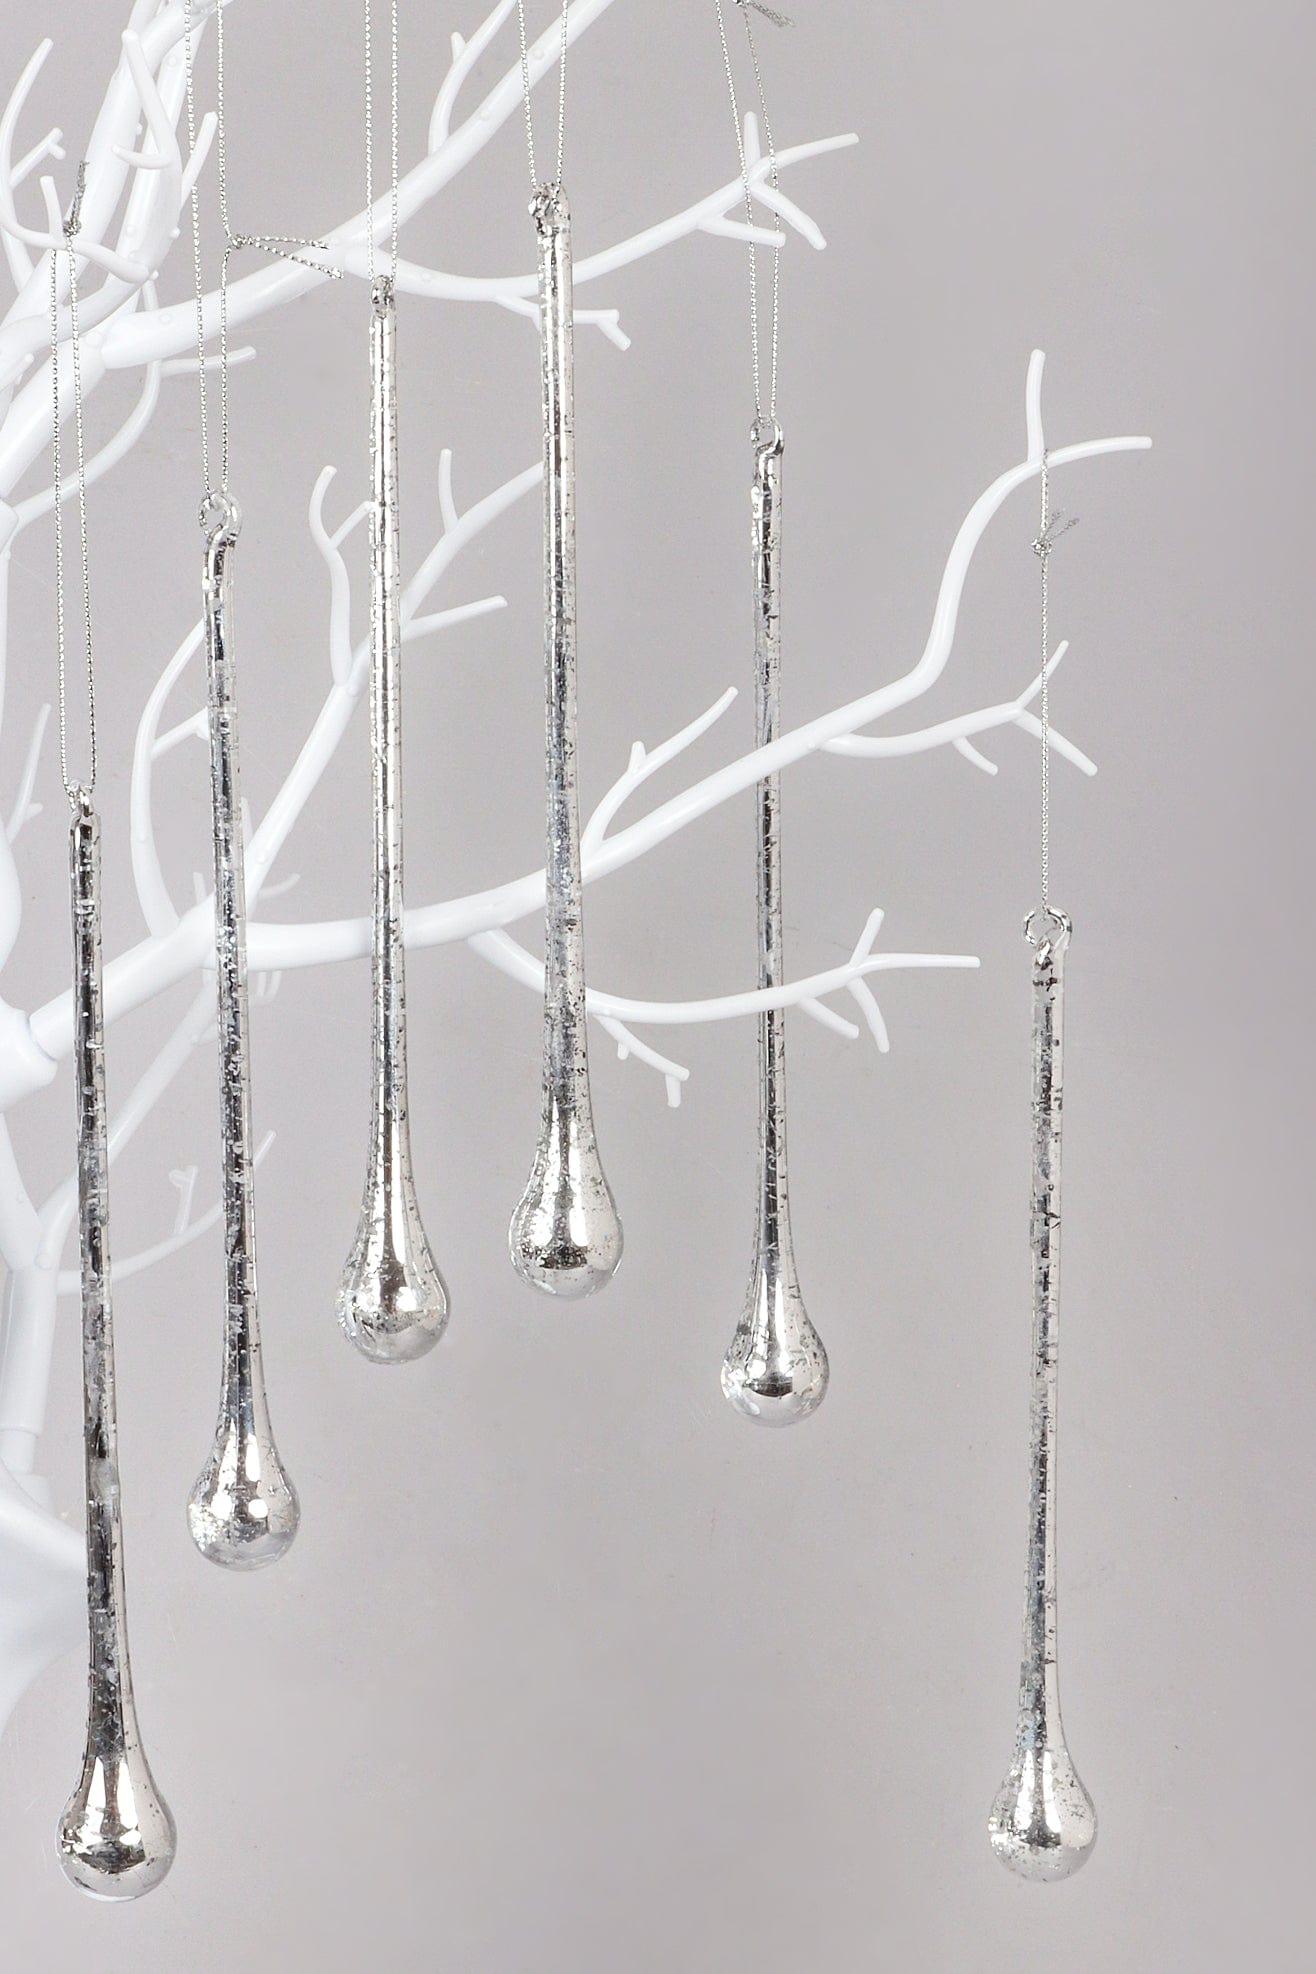 G Decor Christmas Decorations Silver Set of 6 Mottled Silver Glass Long Droplets